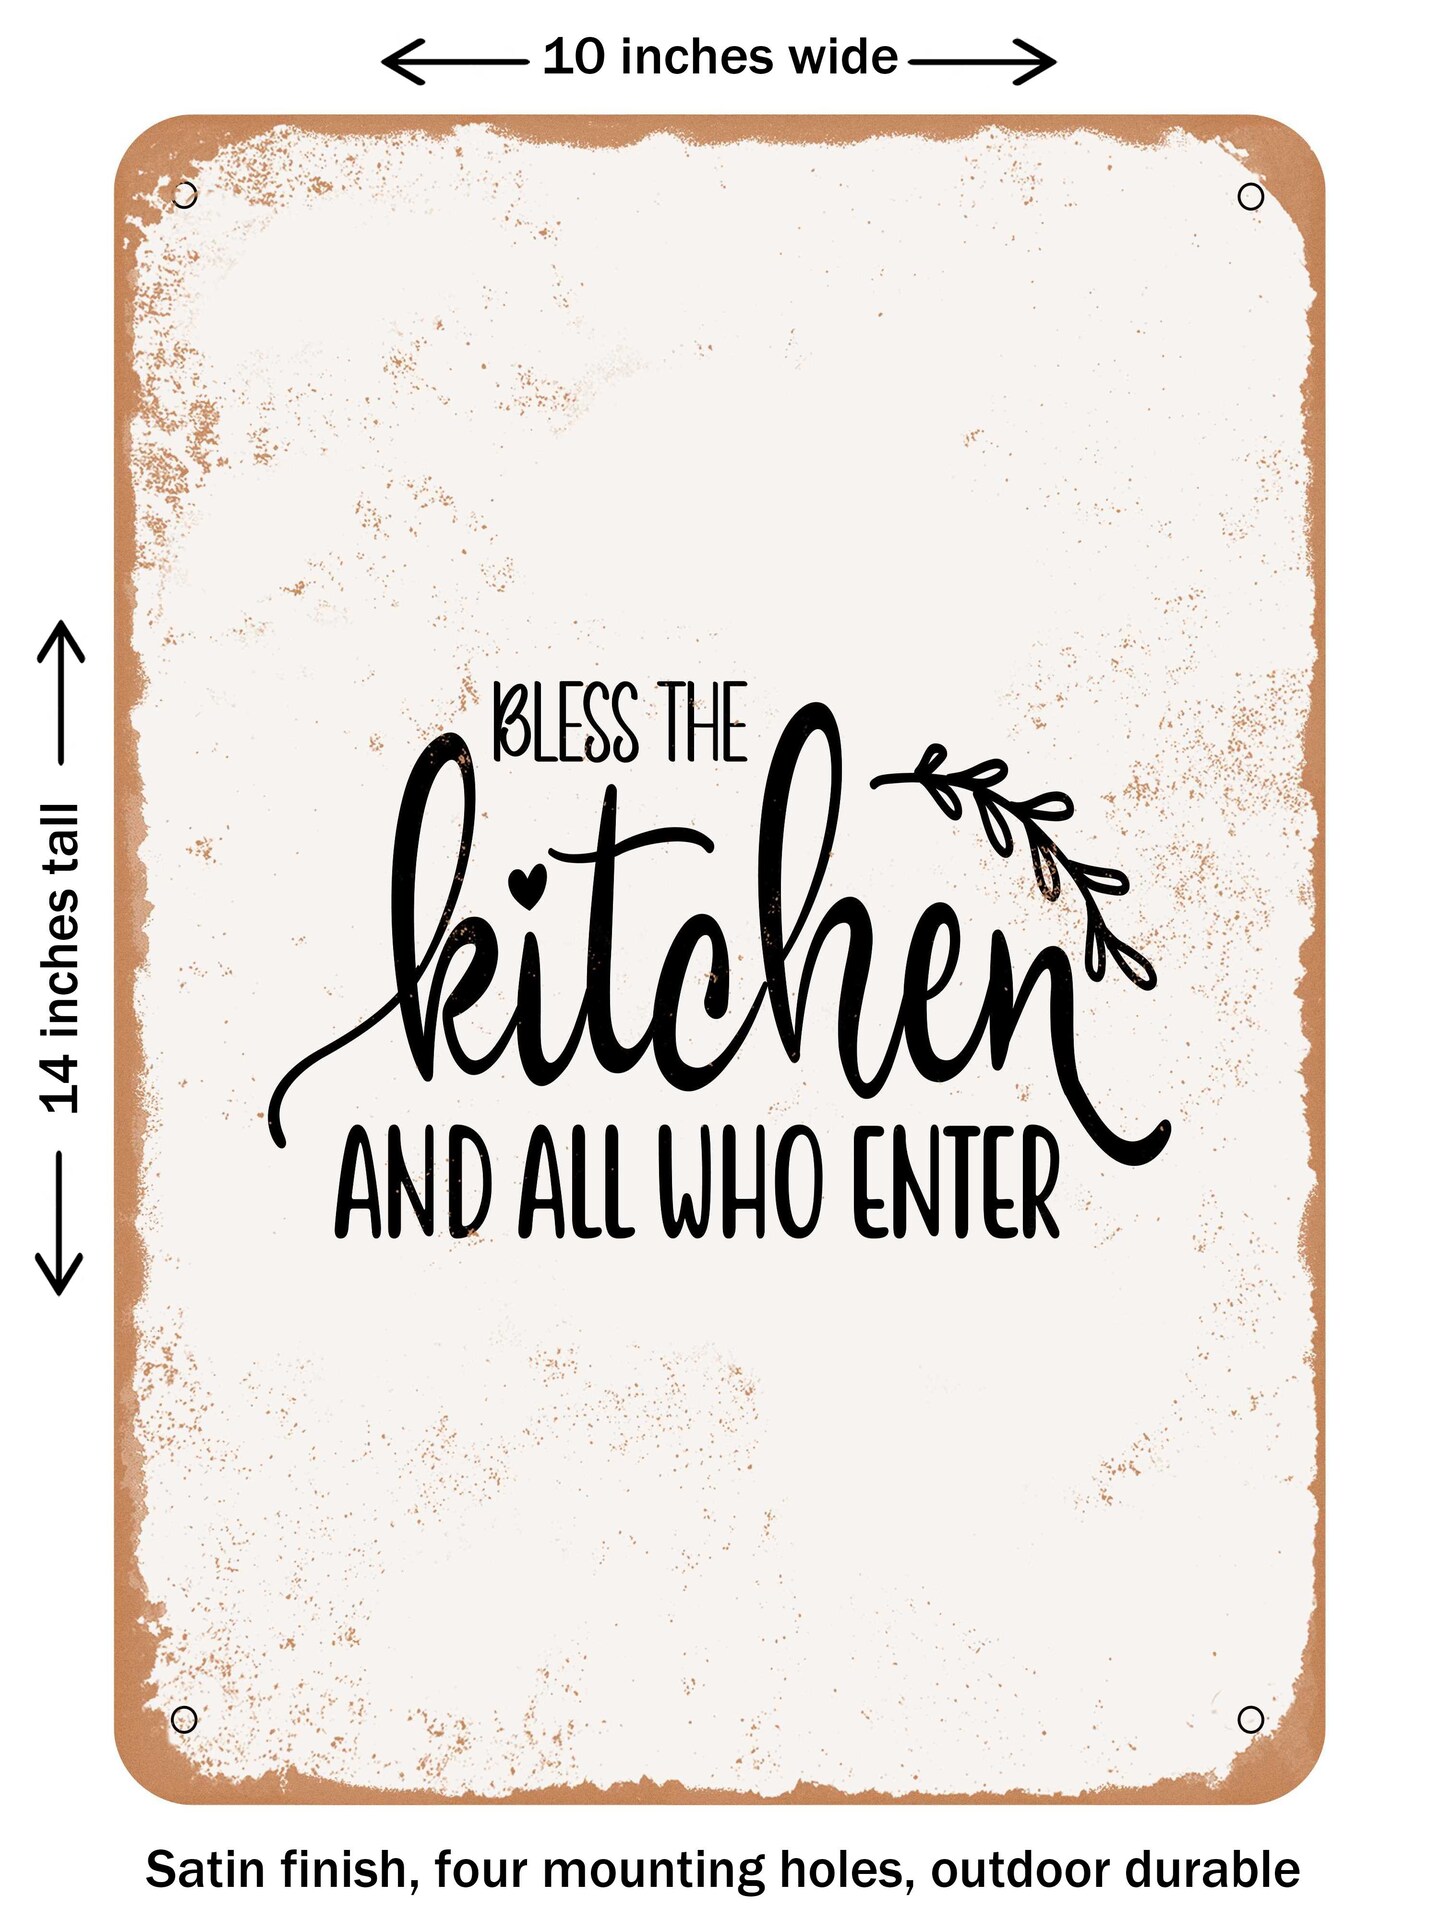 DECORATIVE METAL SIGN - Bless the Kitchen and All Who Enter  - Vintage Rusty Look